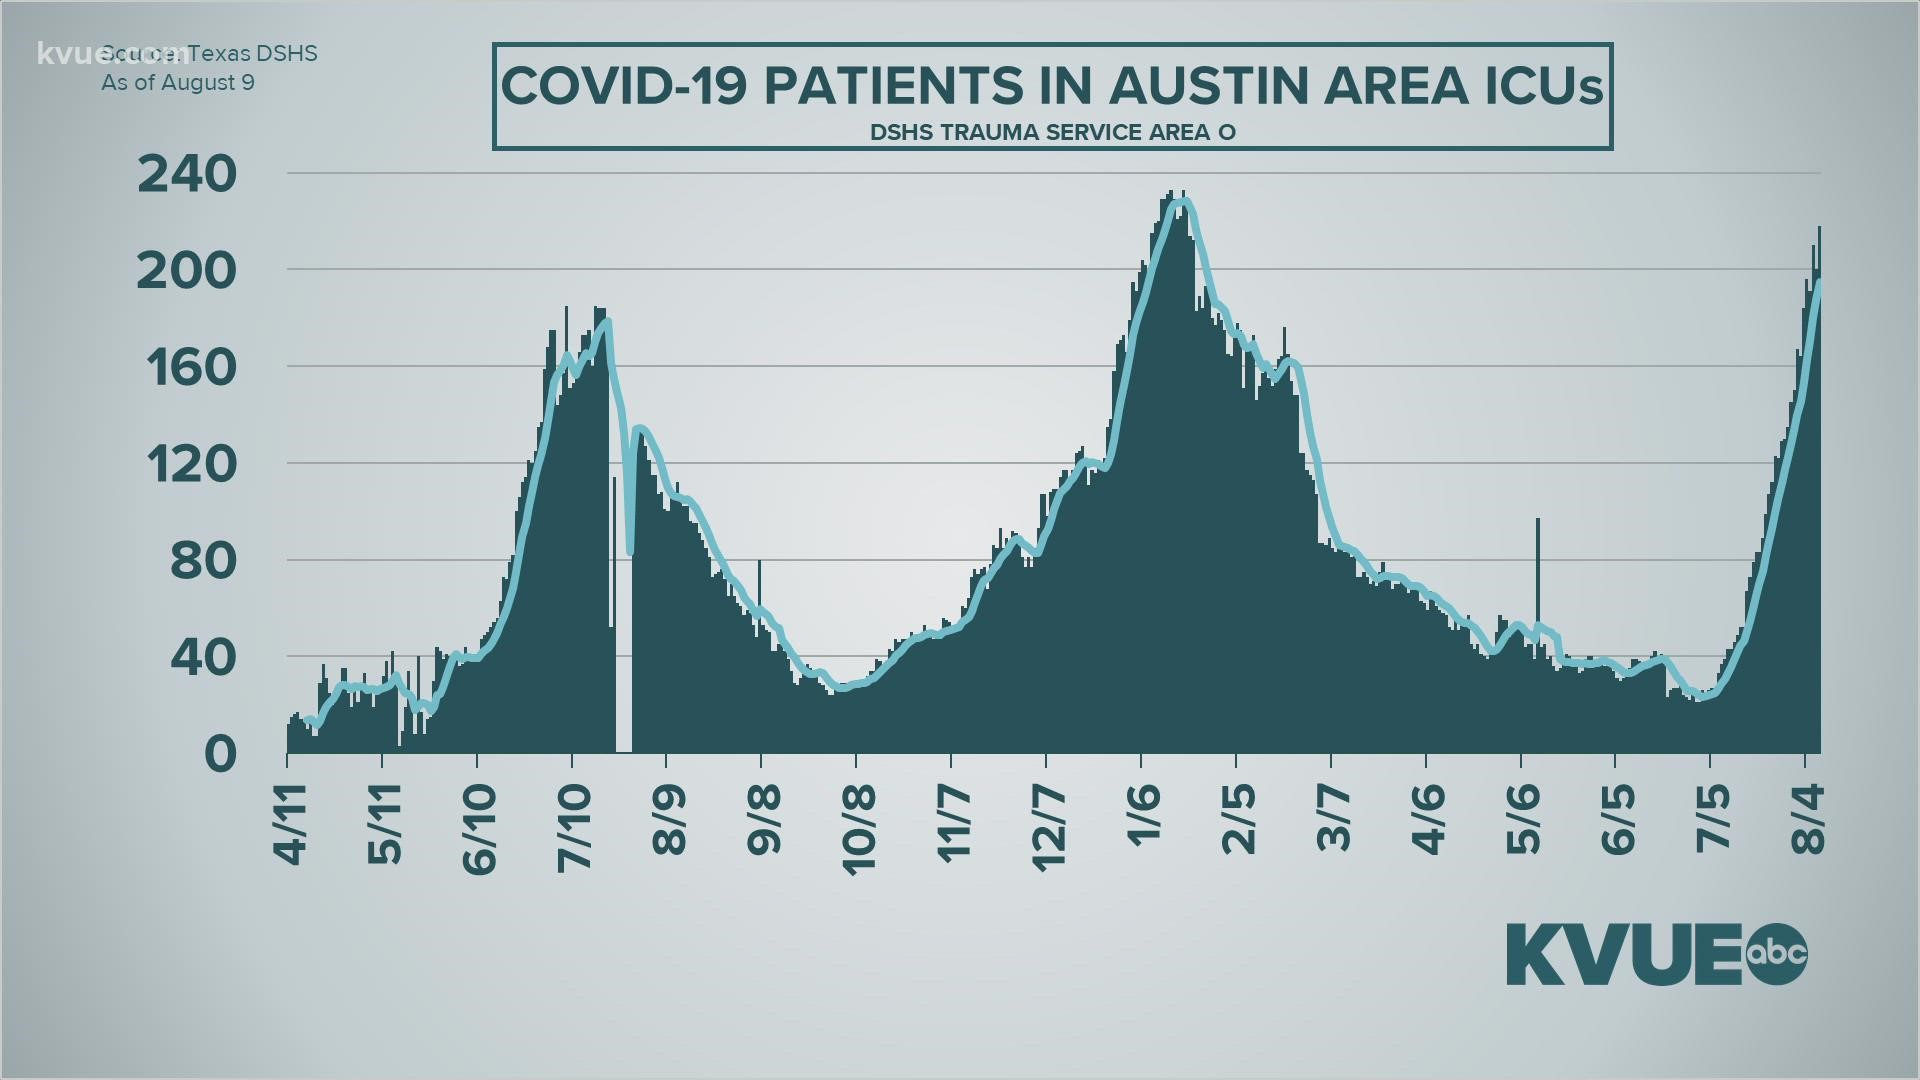 Only 6 ICU beds are available for COVID-19 patients in Austin-area hospitals.